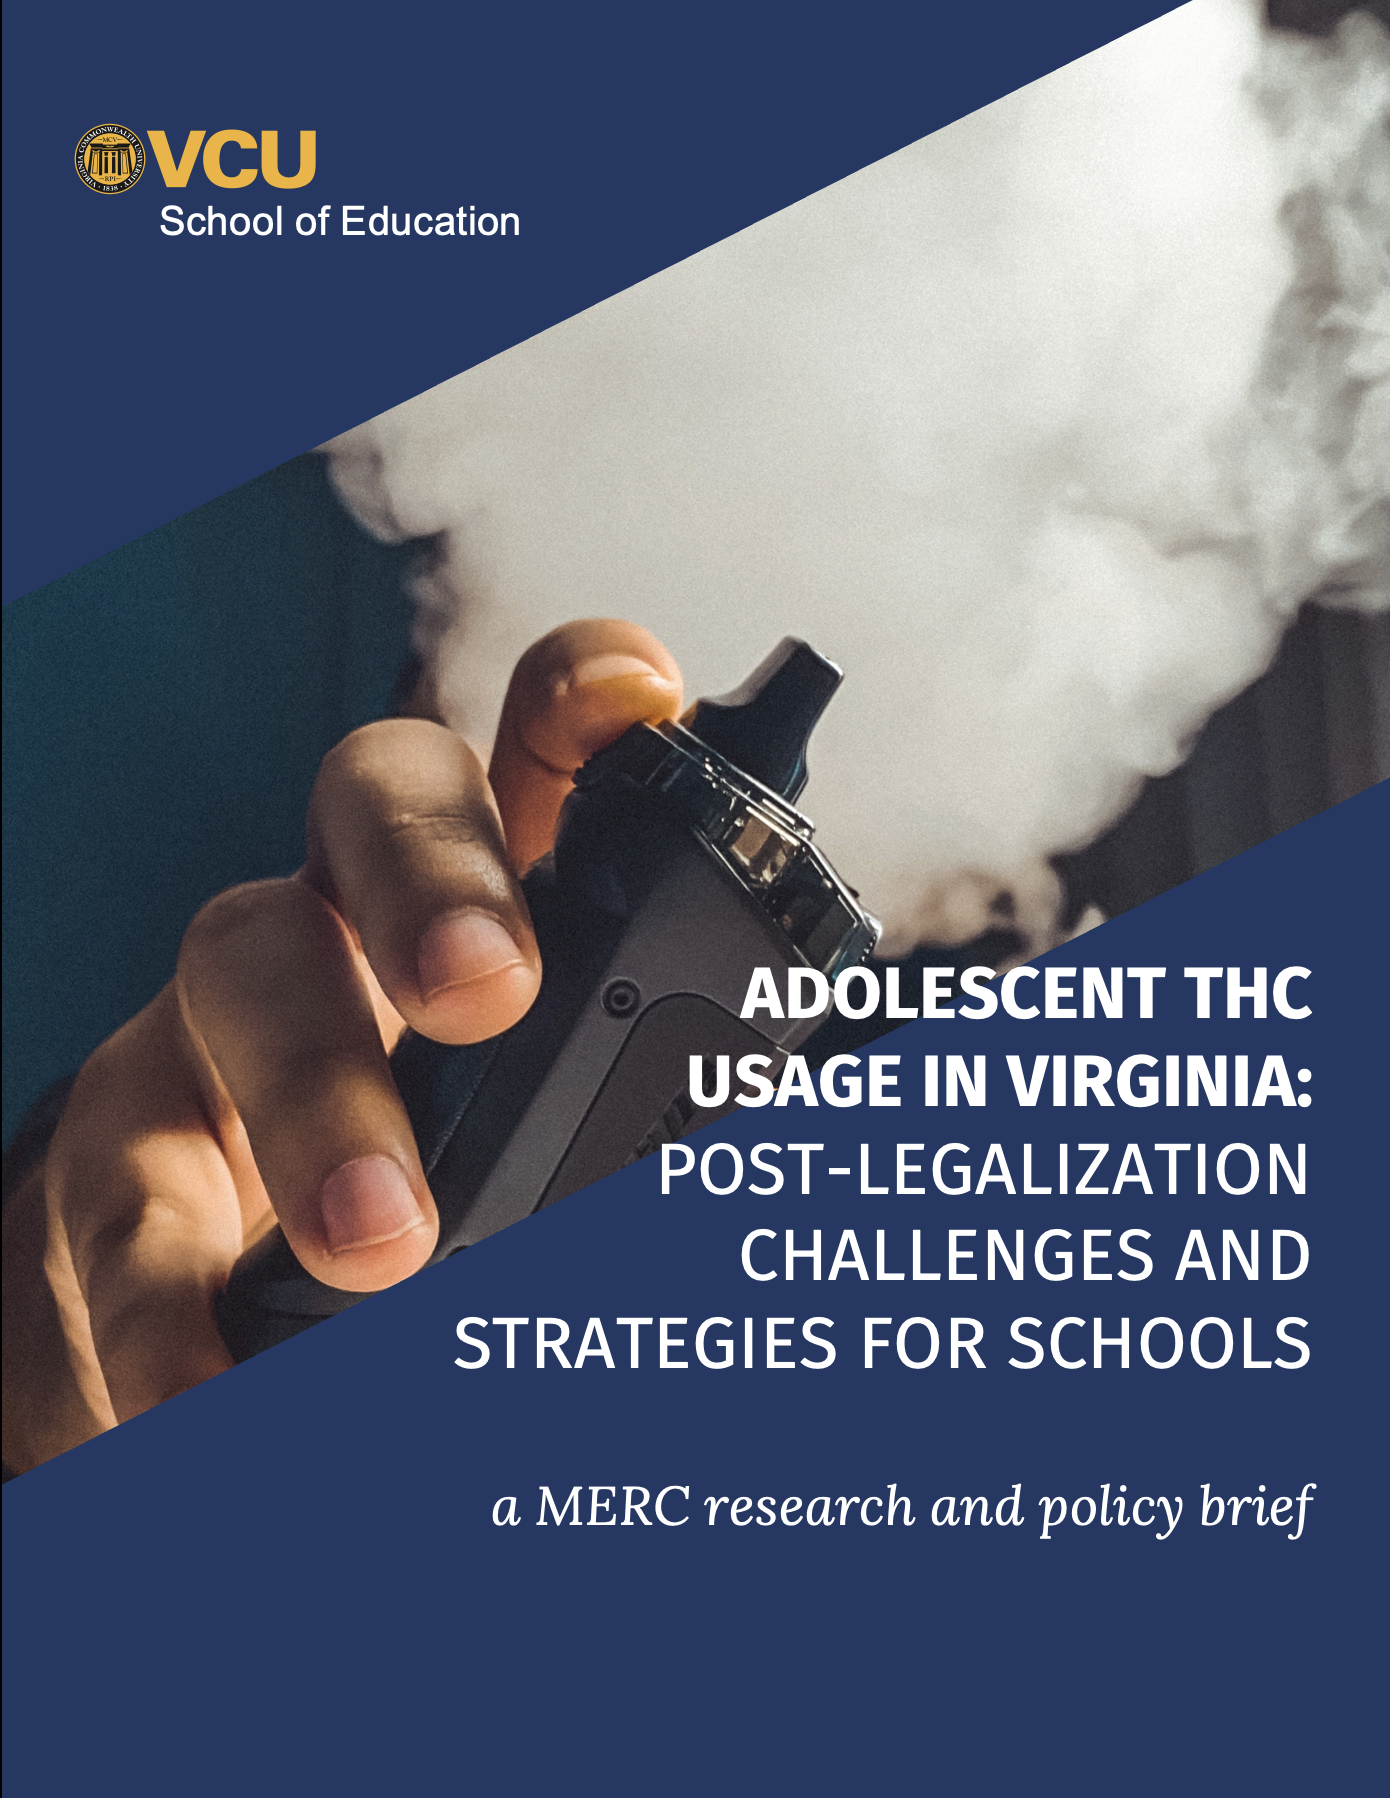 A research brief cover depicting someone vaping